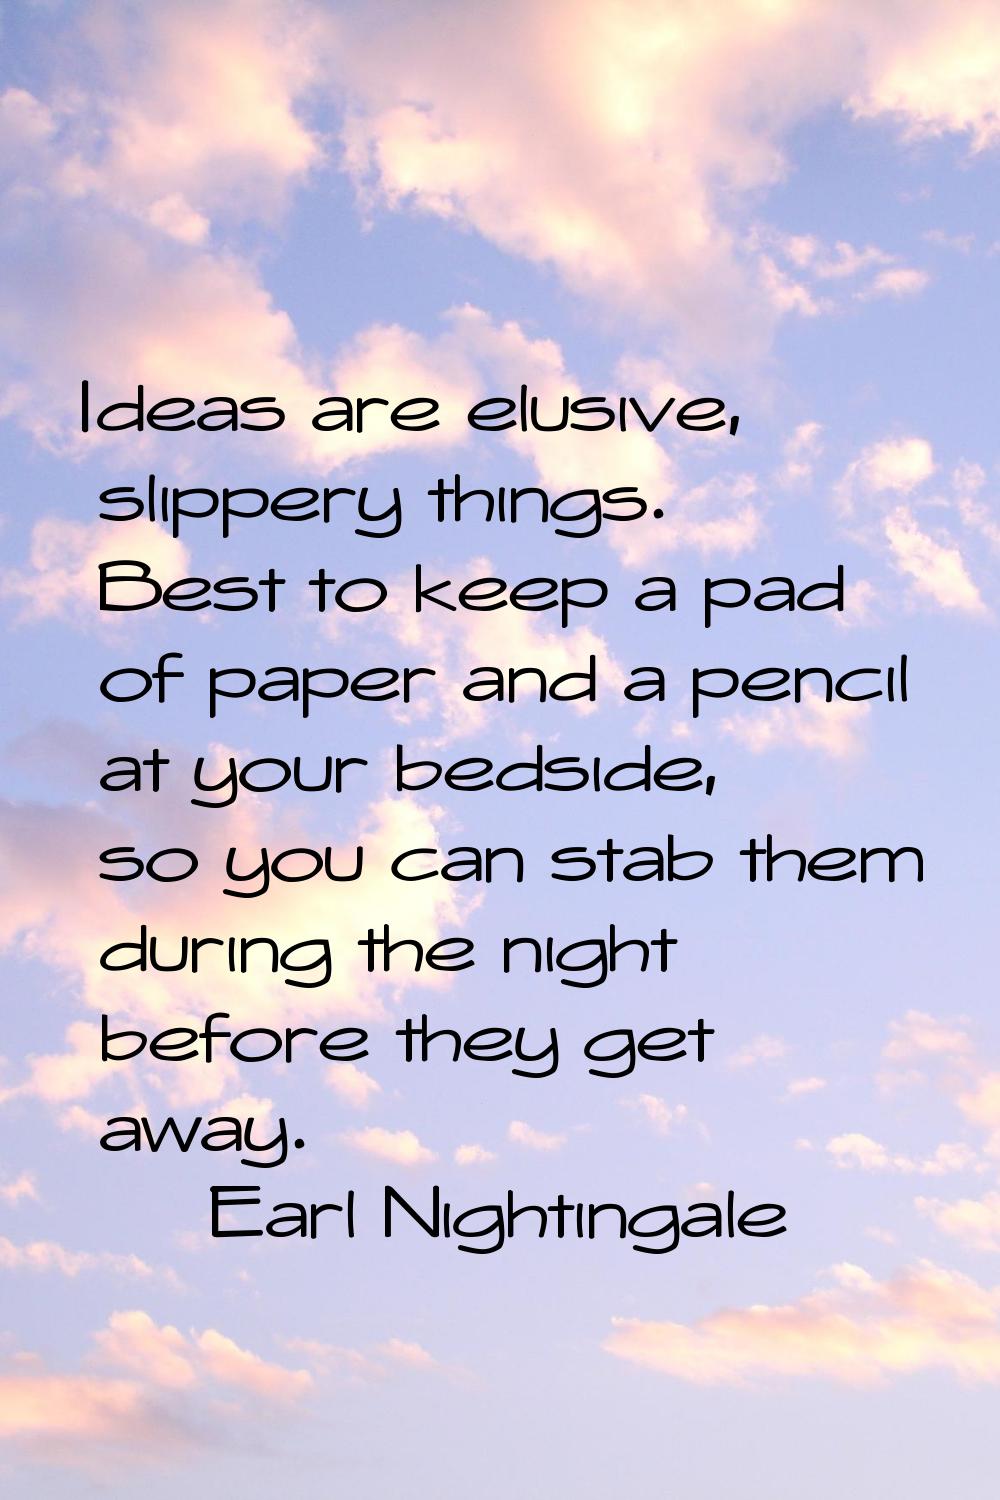 Ideas are elusive, slippery things. Best to keep a pad of paper and a pencil at your bedside, so yo